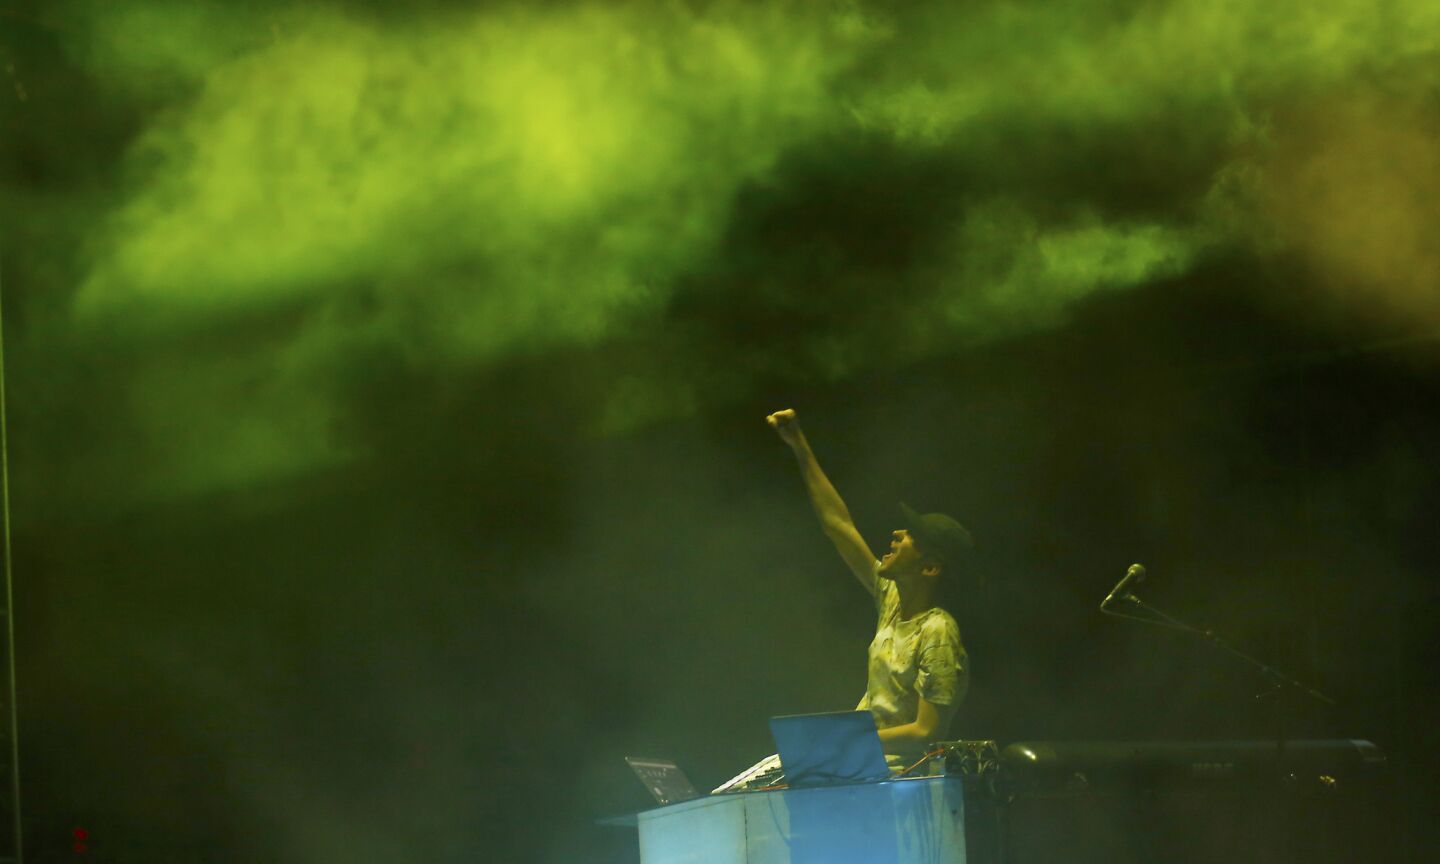 Madeon, a French electronic musician, performs at Hard Summer.